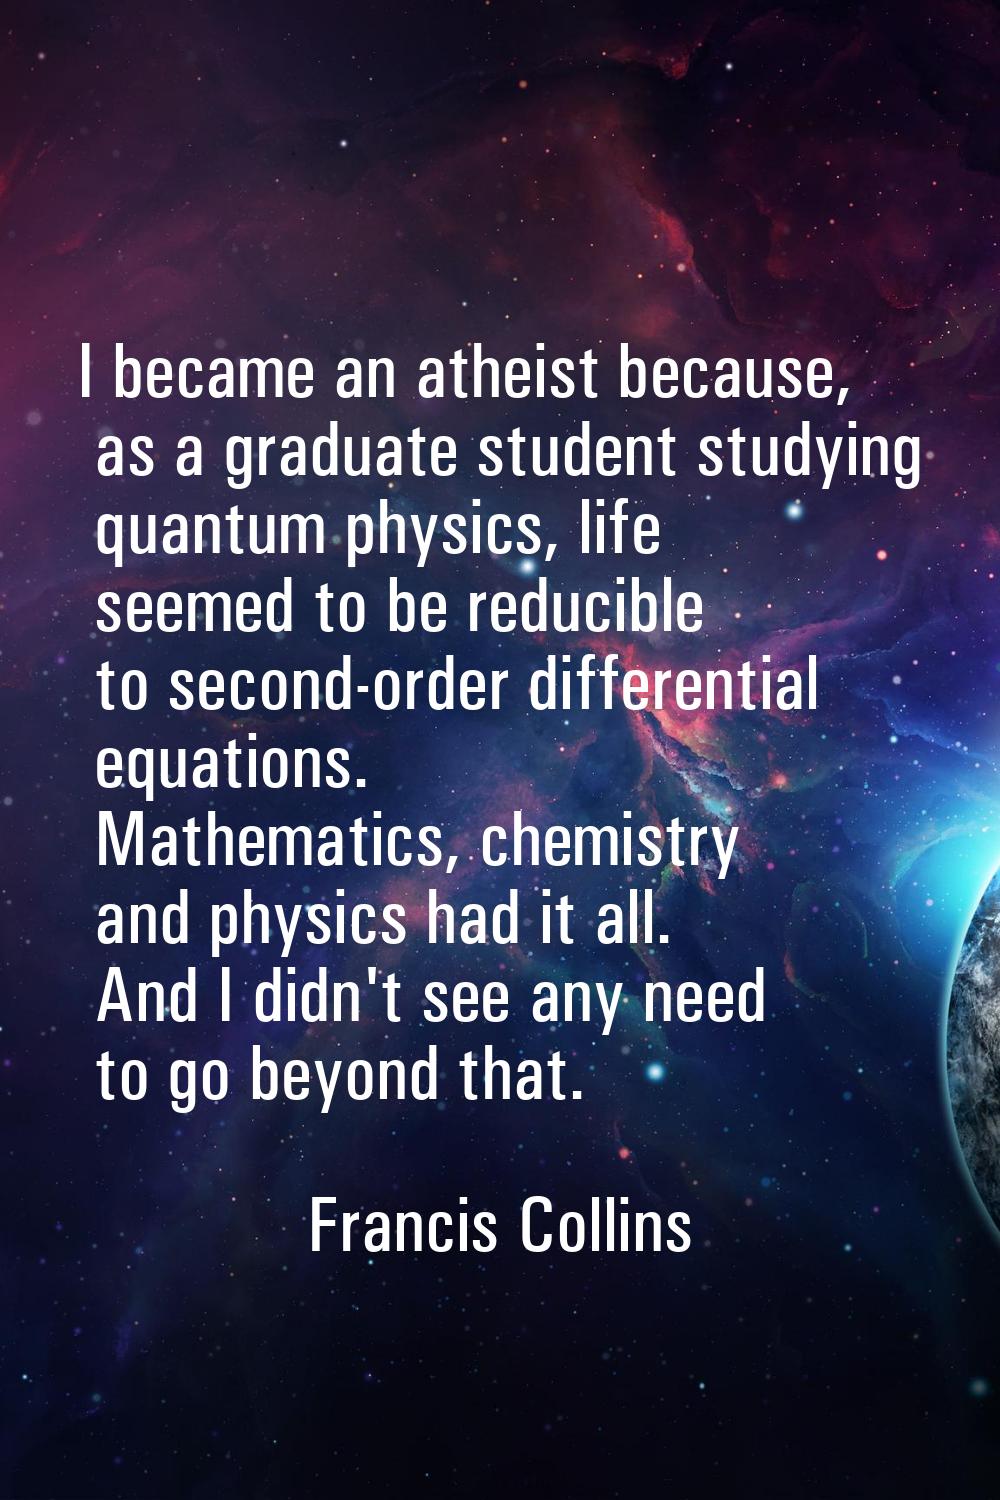 I became an atheist because, as a graduate student studying quantum physics, life seemed to be redu